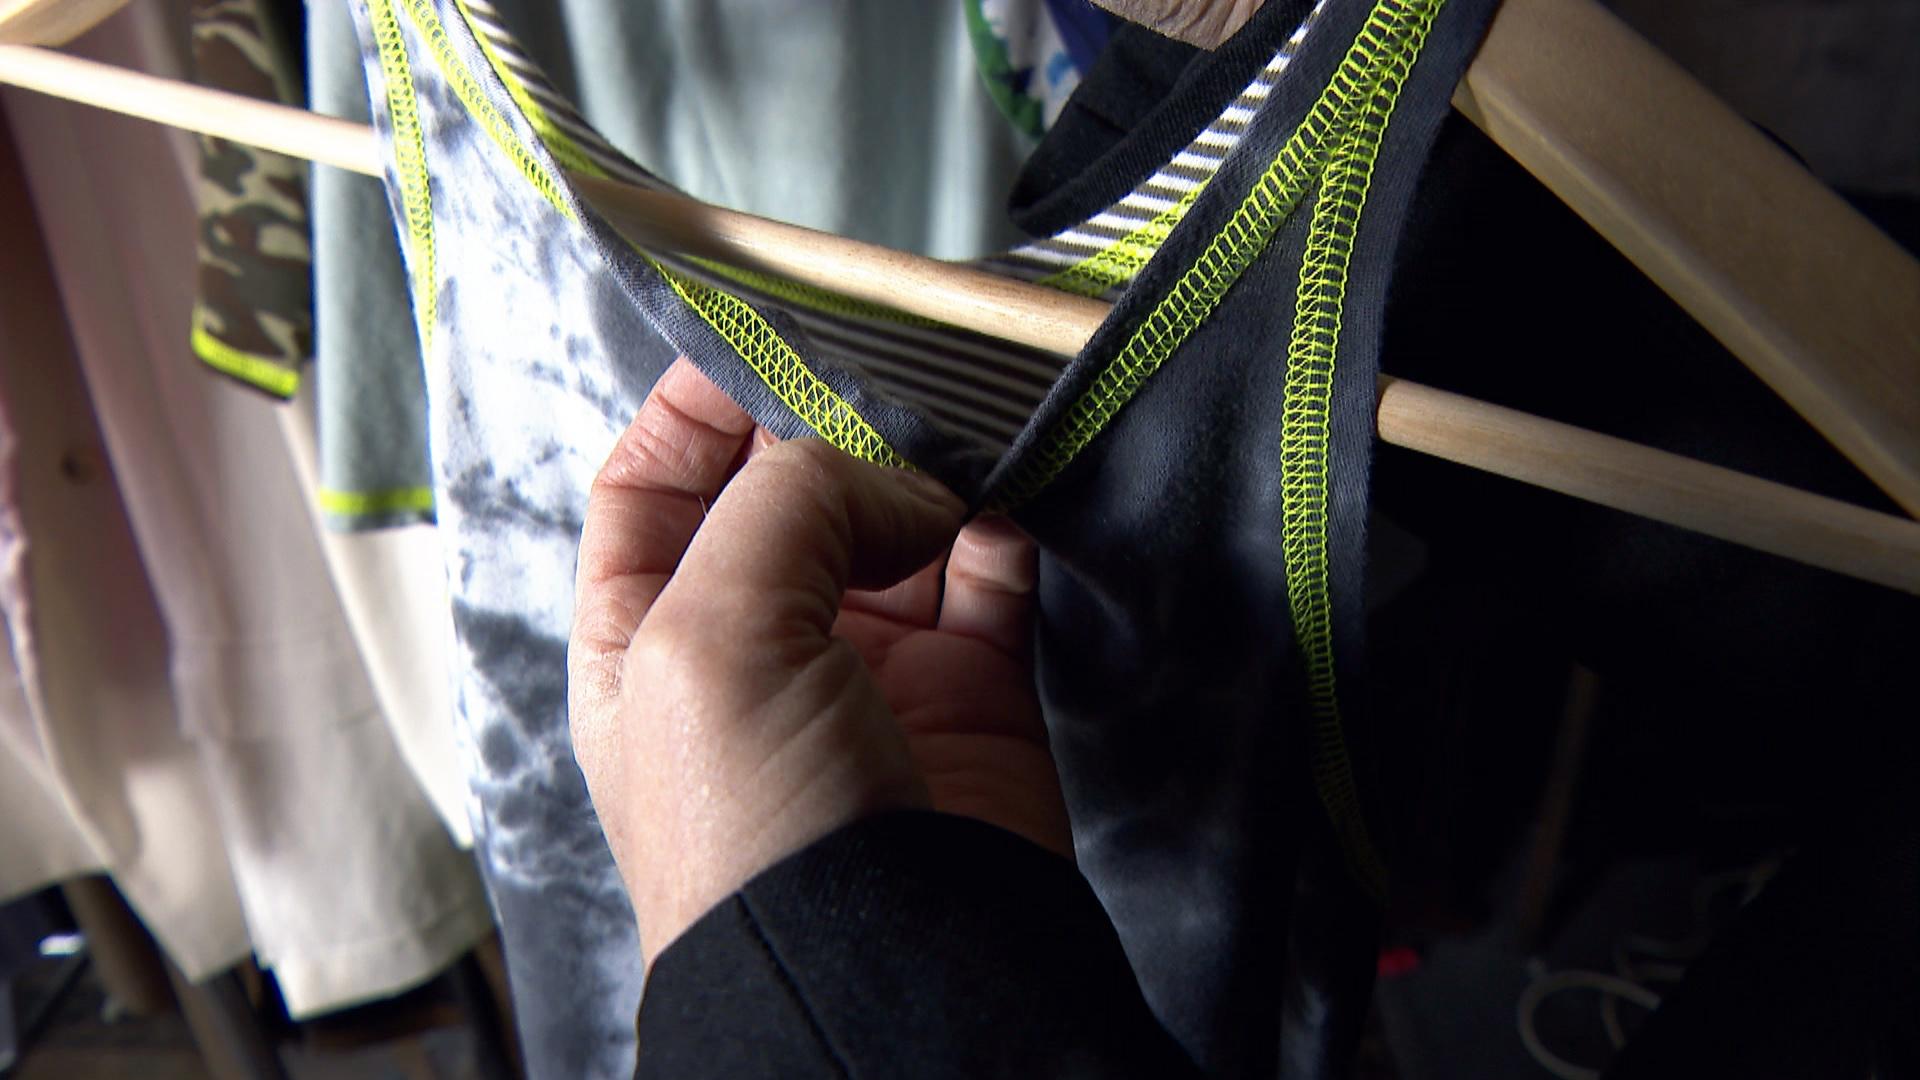 The seams of Minor Details clothing are flat and soft to provide extra comfort. (WTTW News)